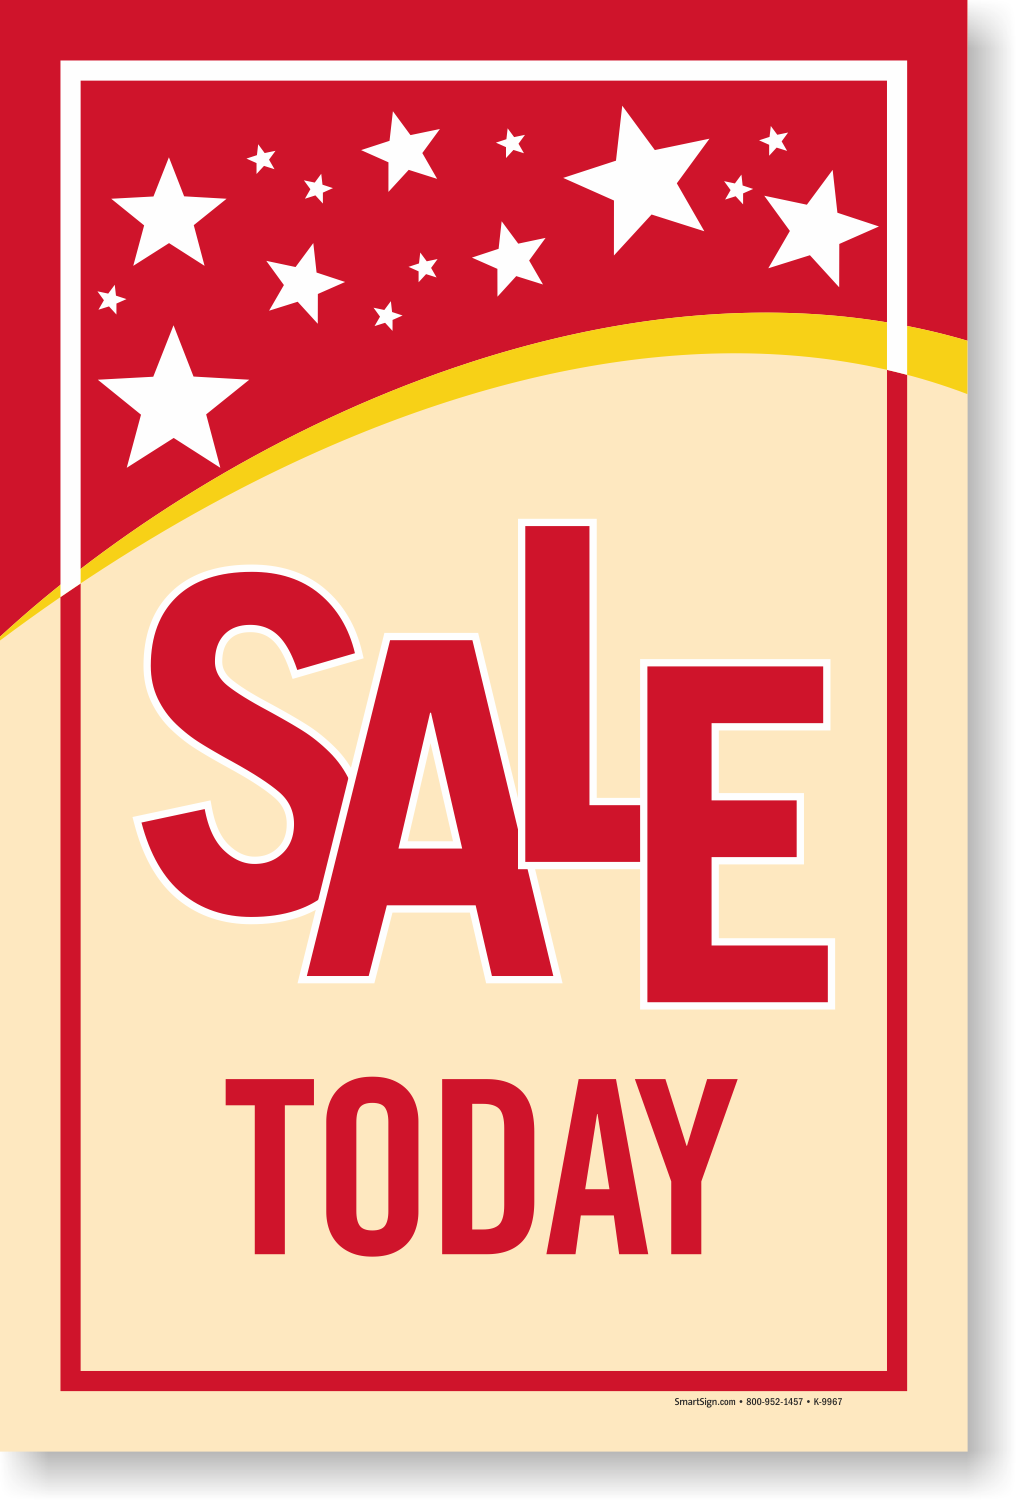 Sale Today Sign With Stars Symbol - Unbeatable Prices, SKU - K-9967